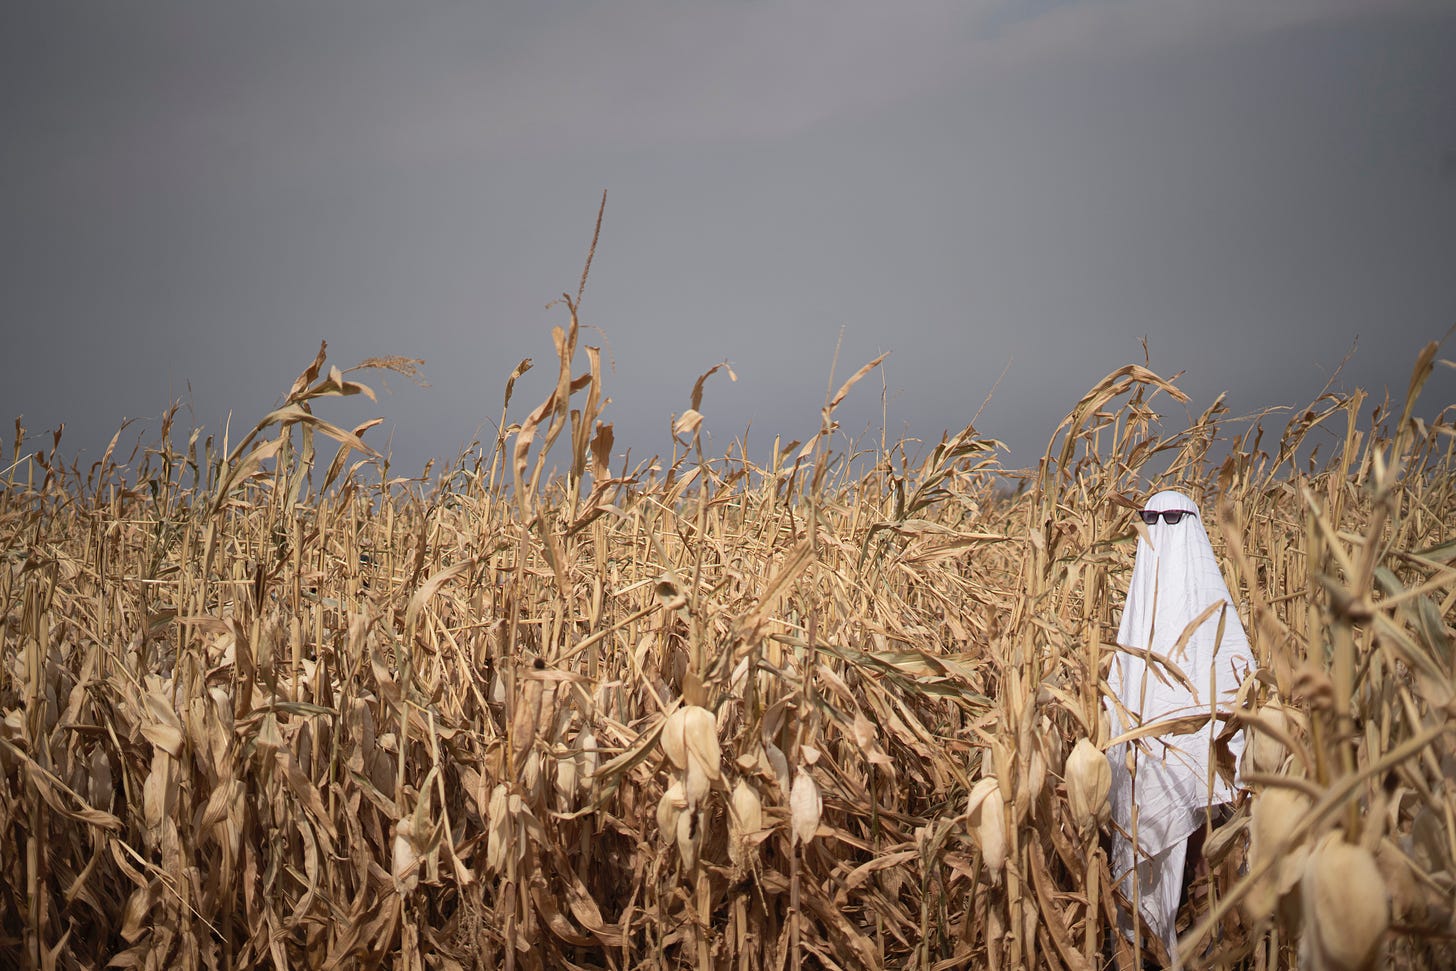 A cornfield under a moody grey sky with a ghost wearing sunglasses placed as a scarecrow, or perhaps a warning to humans?